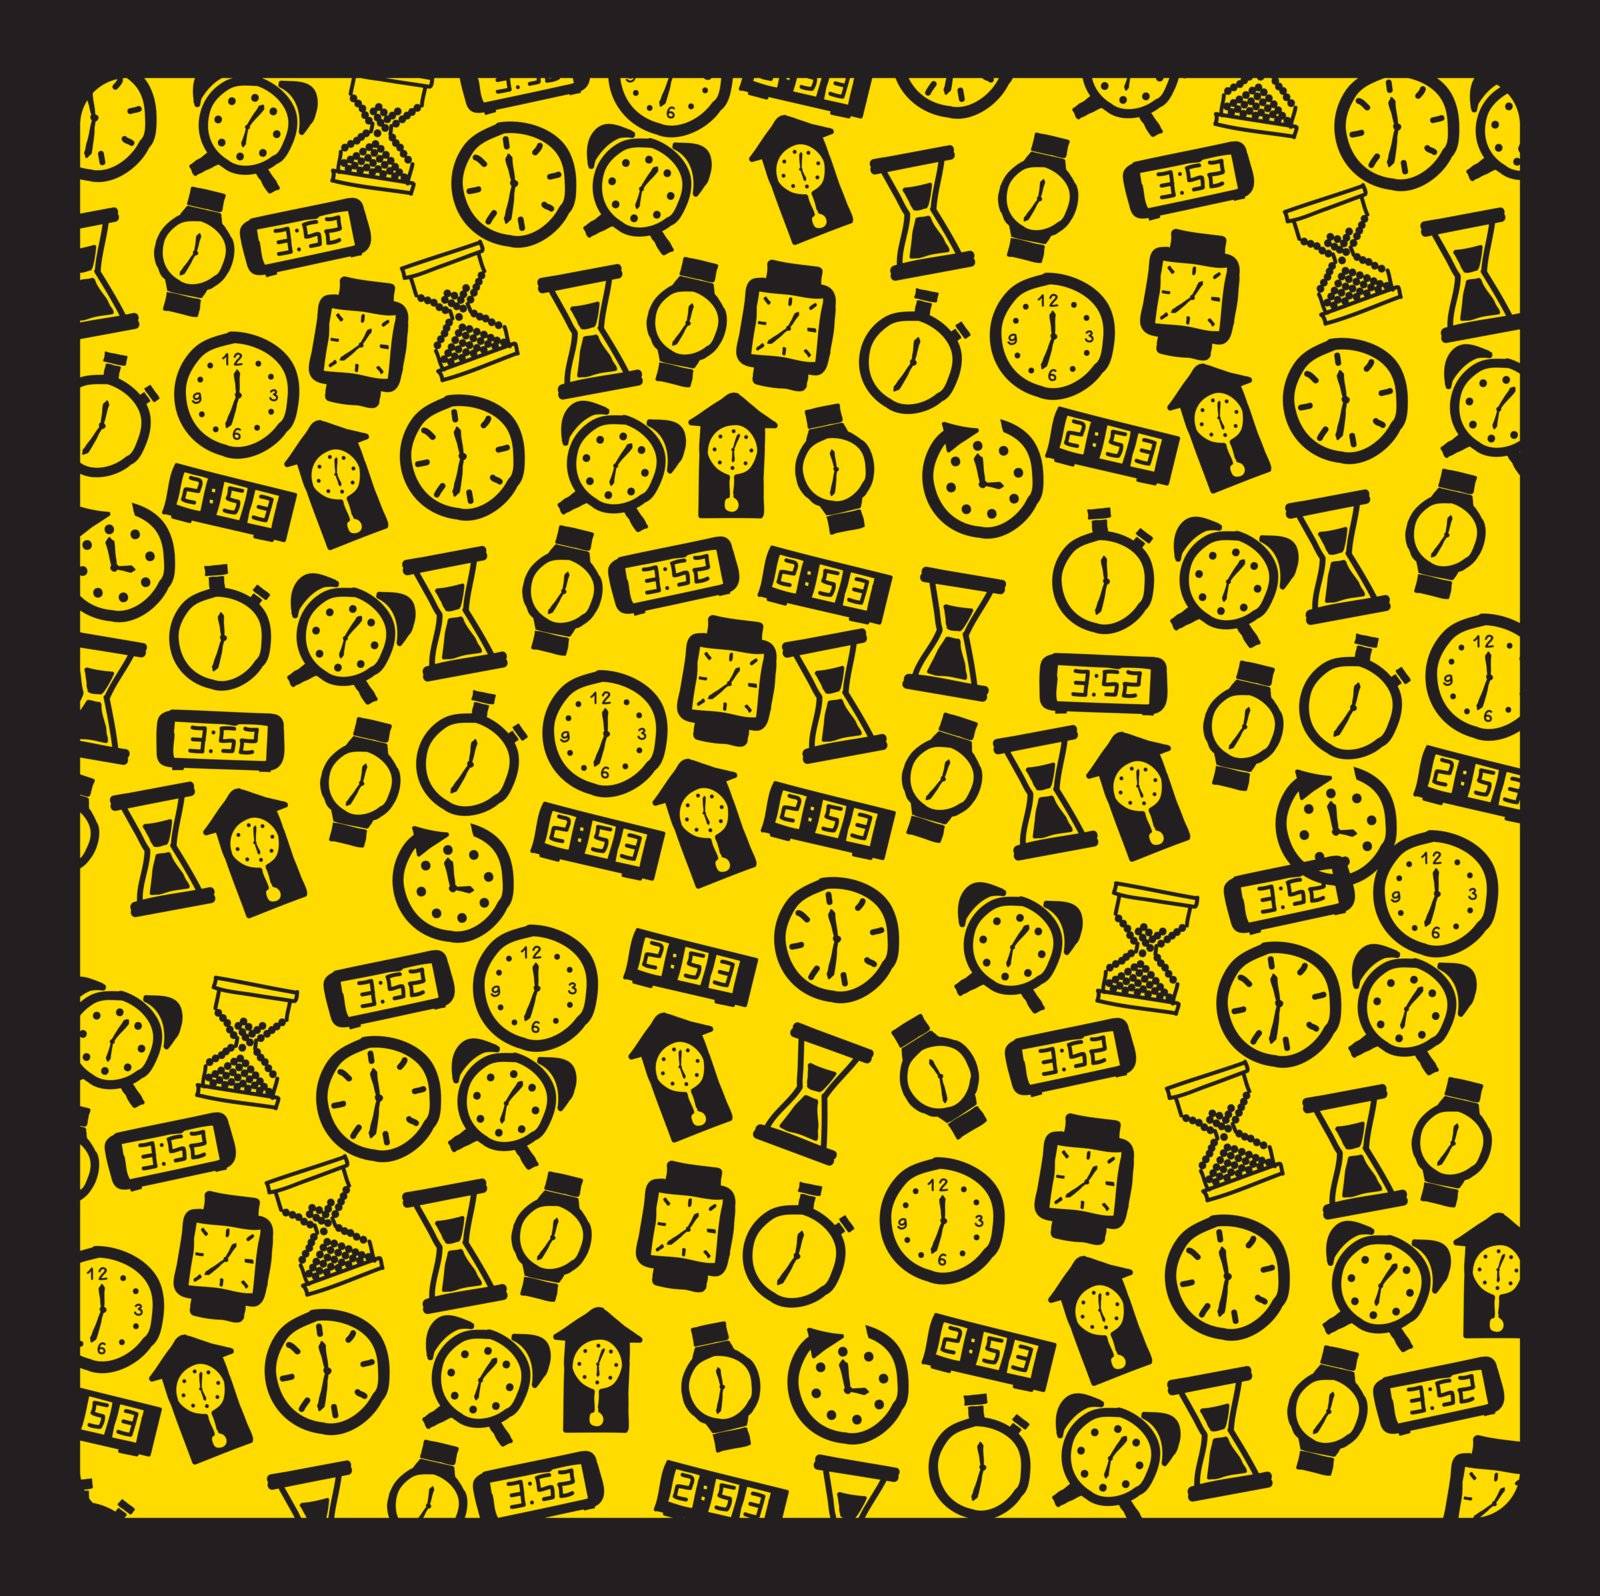 clock icons over yellow background. vector illustration